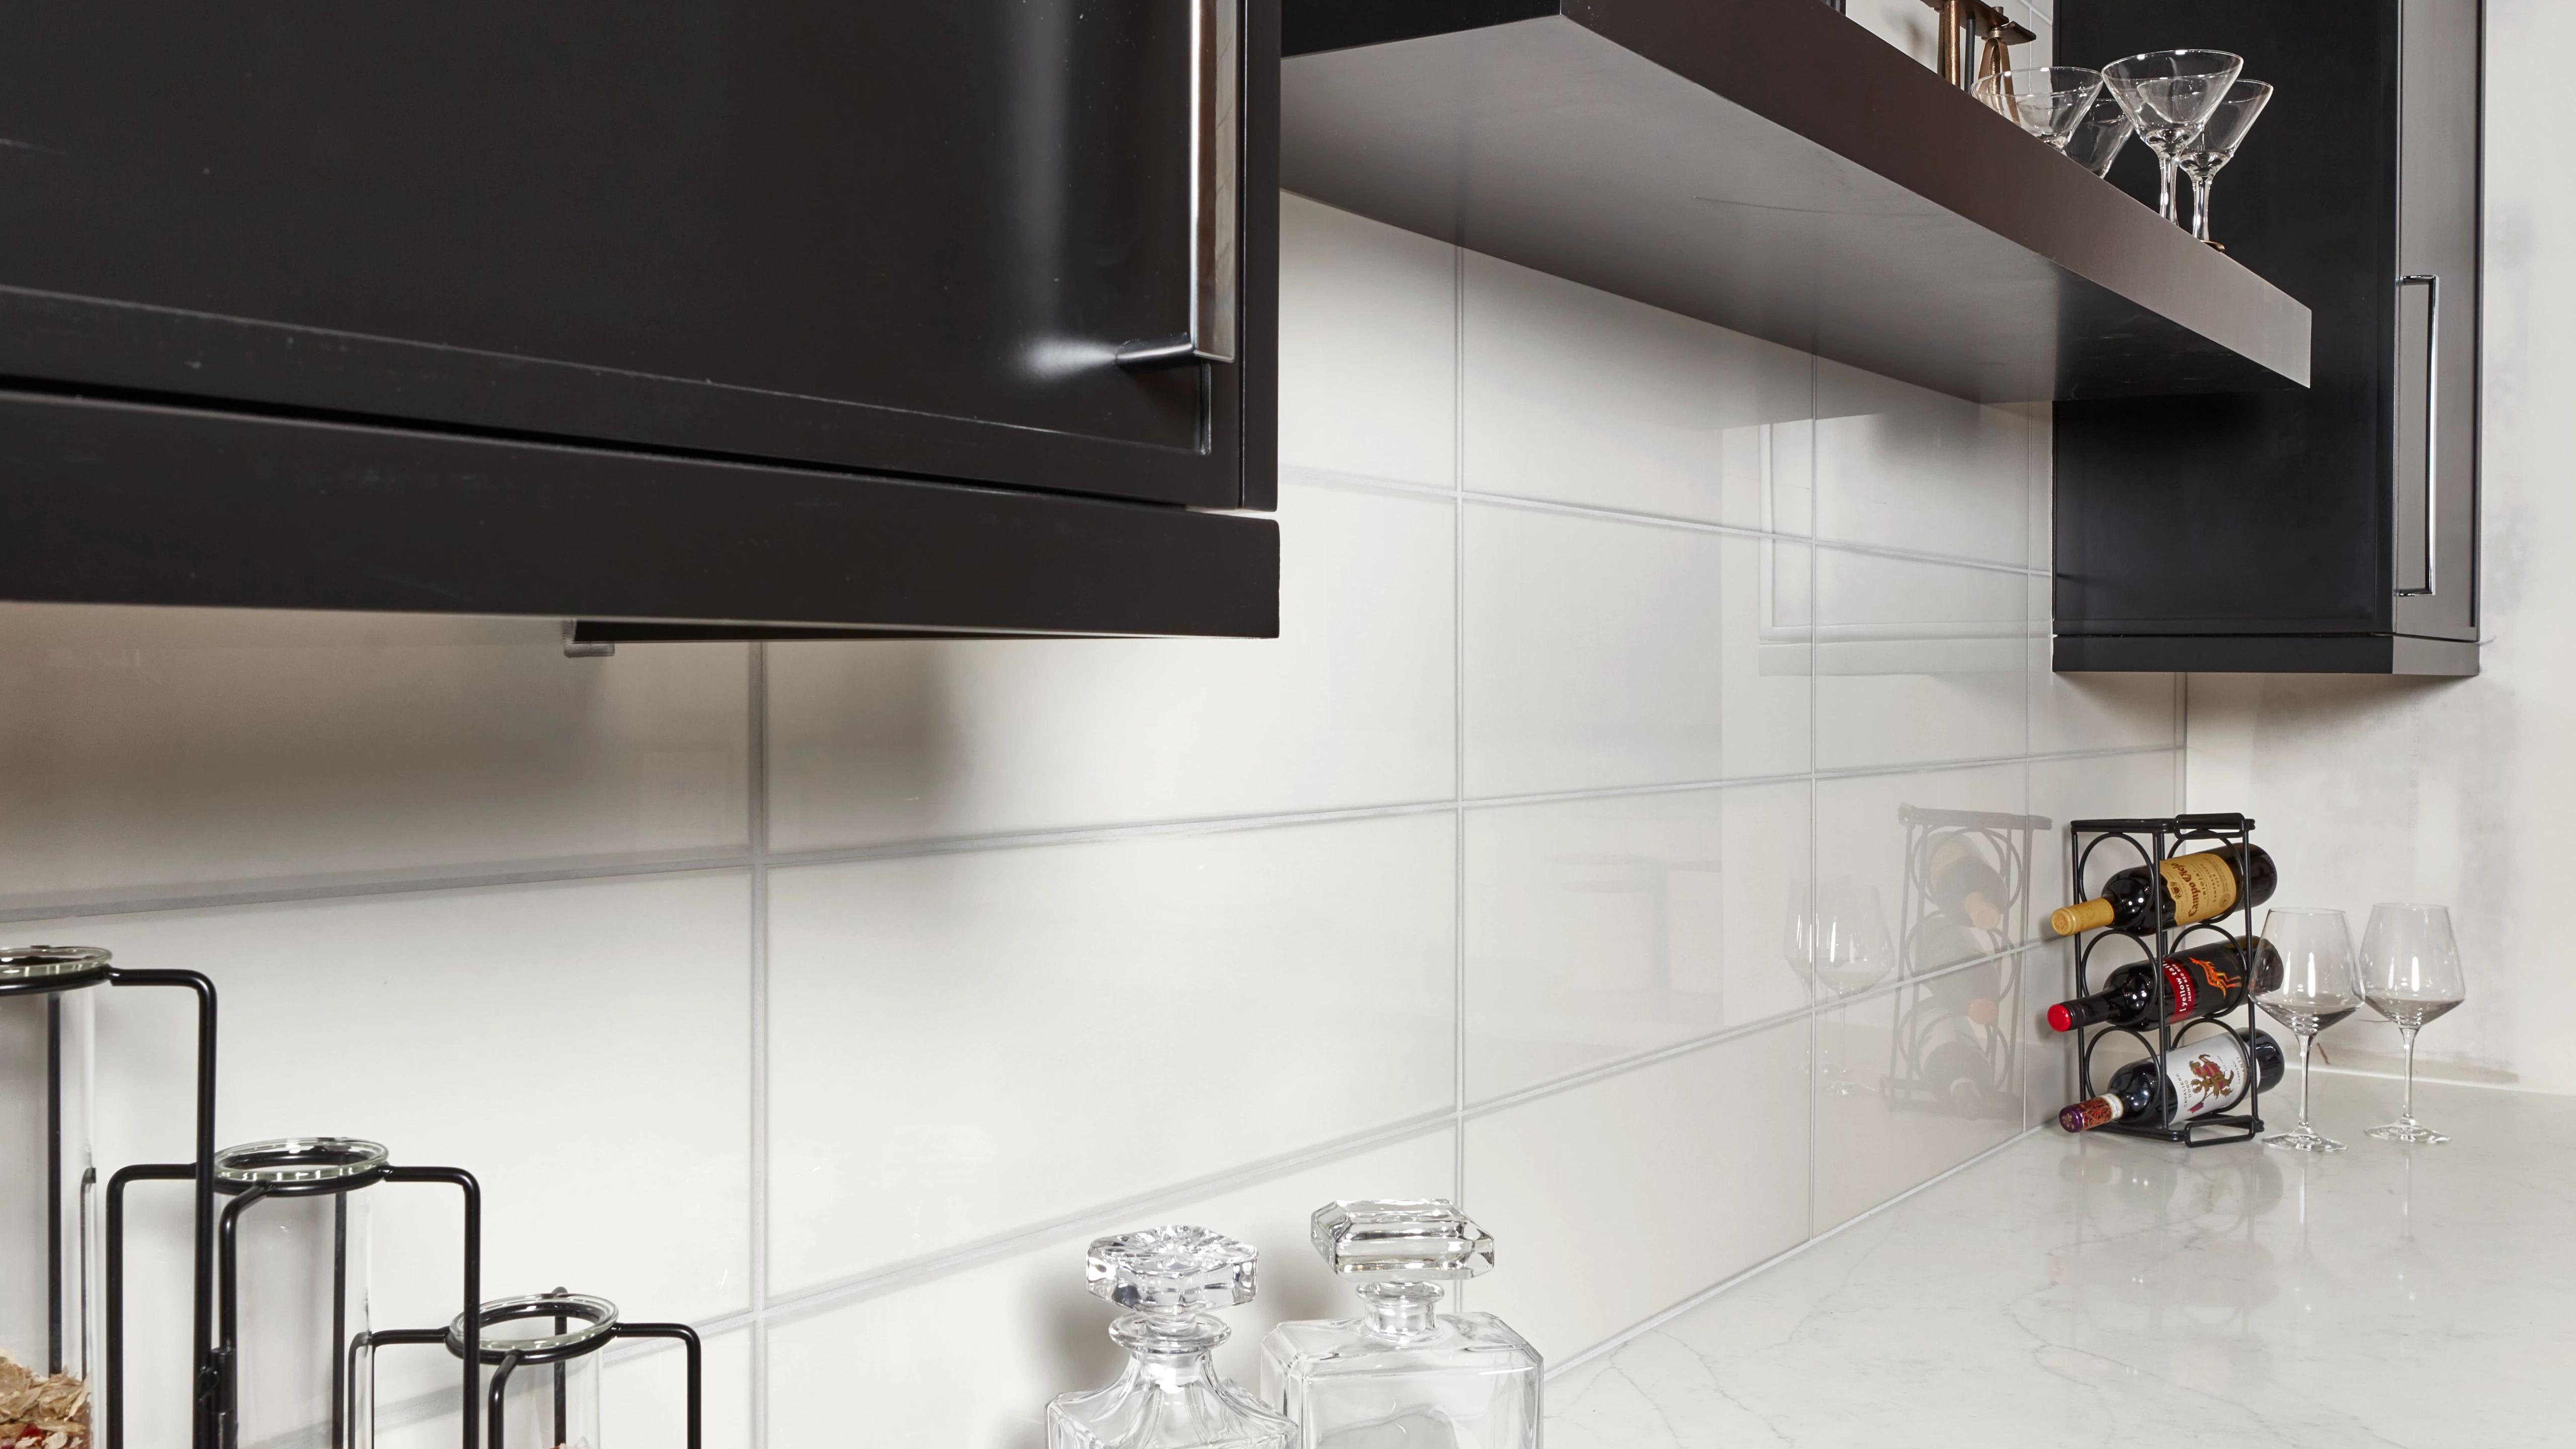 The Vetri series is a rectified glazed porcelain tile created using digital print technology